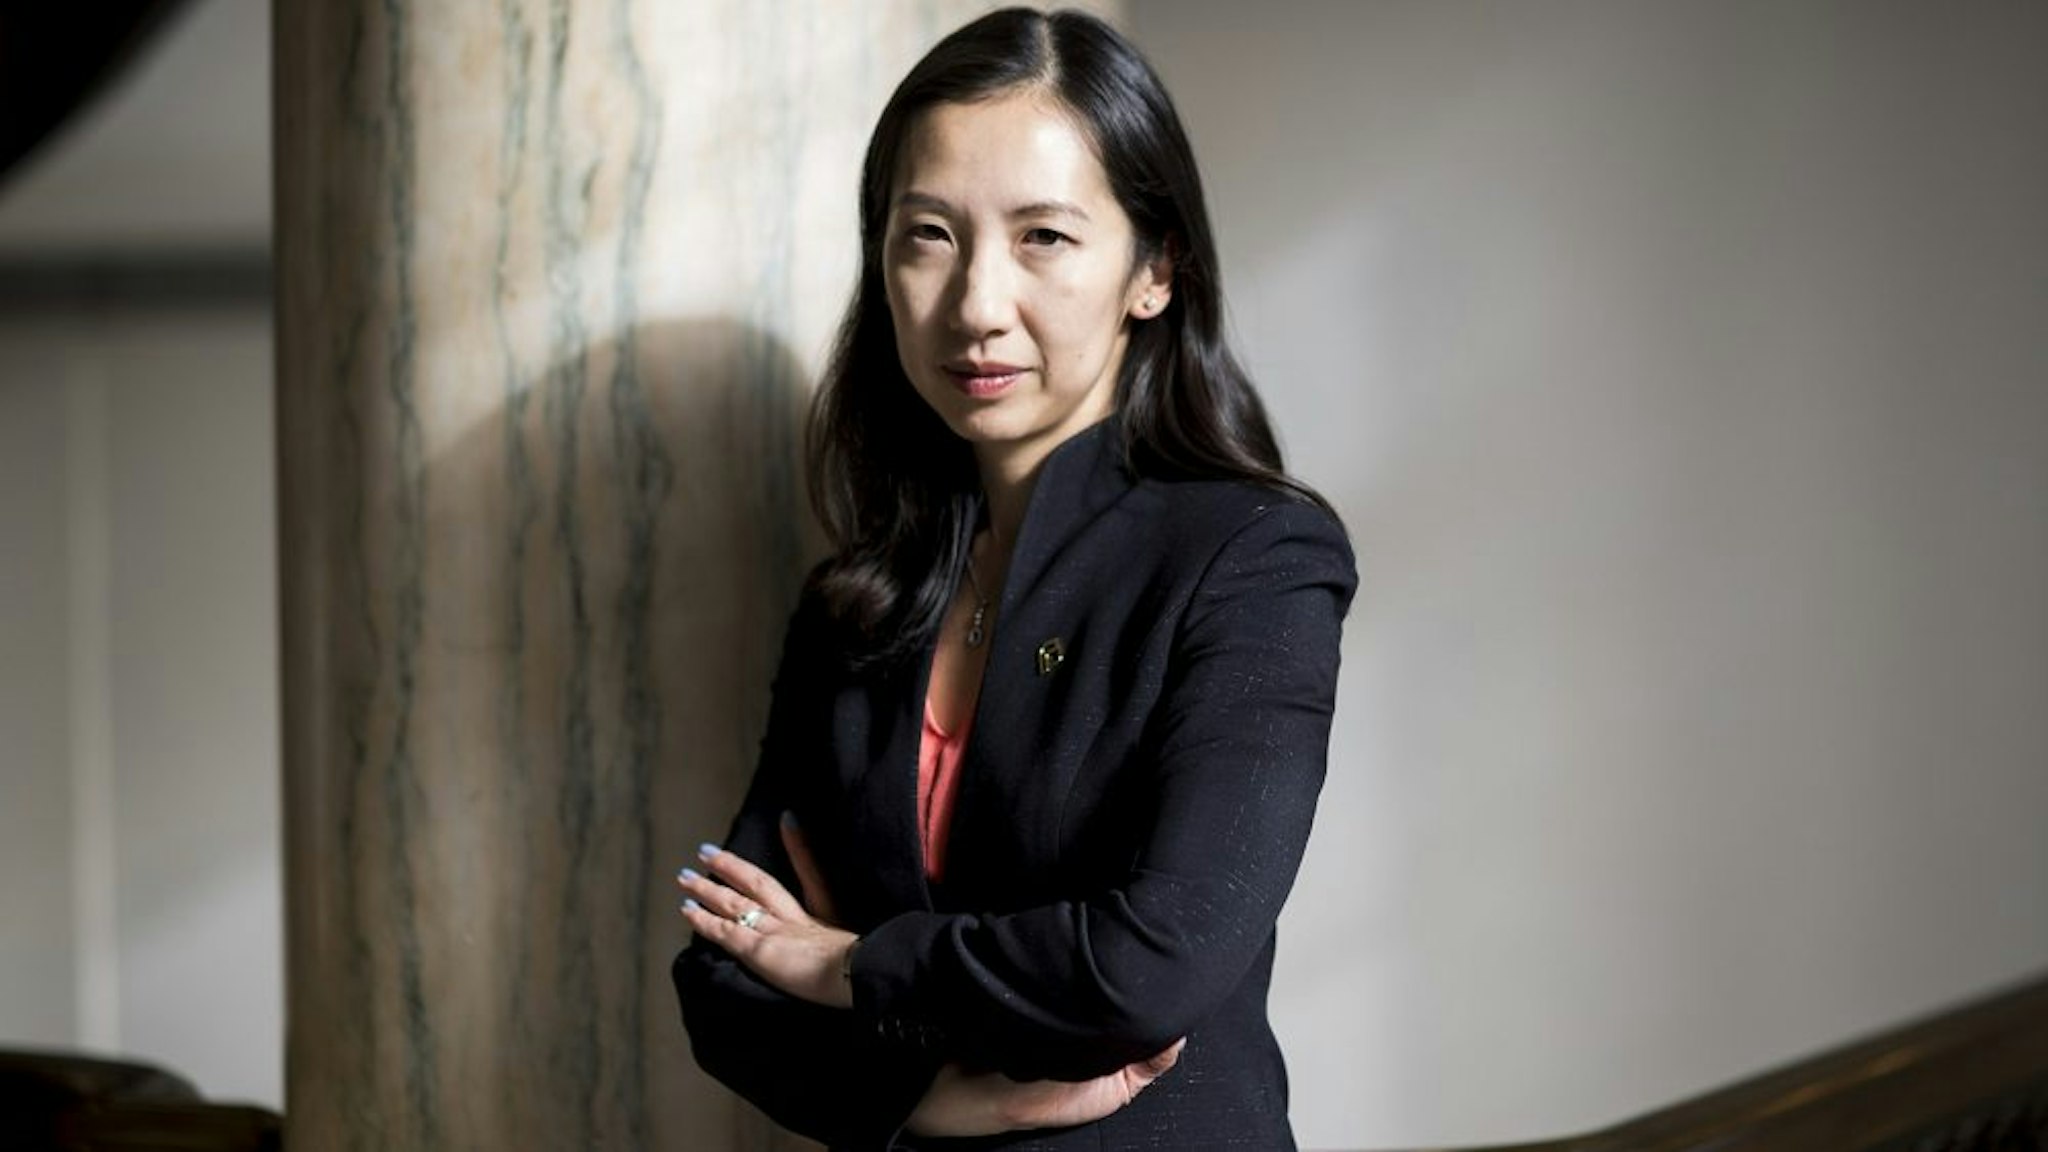 UNITED STATES - JANUARY 8: Dr. Leana Wen is the new President of the Planned Parenthood Federation of America and the Planned Parenthood Action Fund.